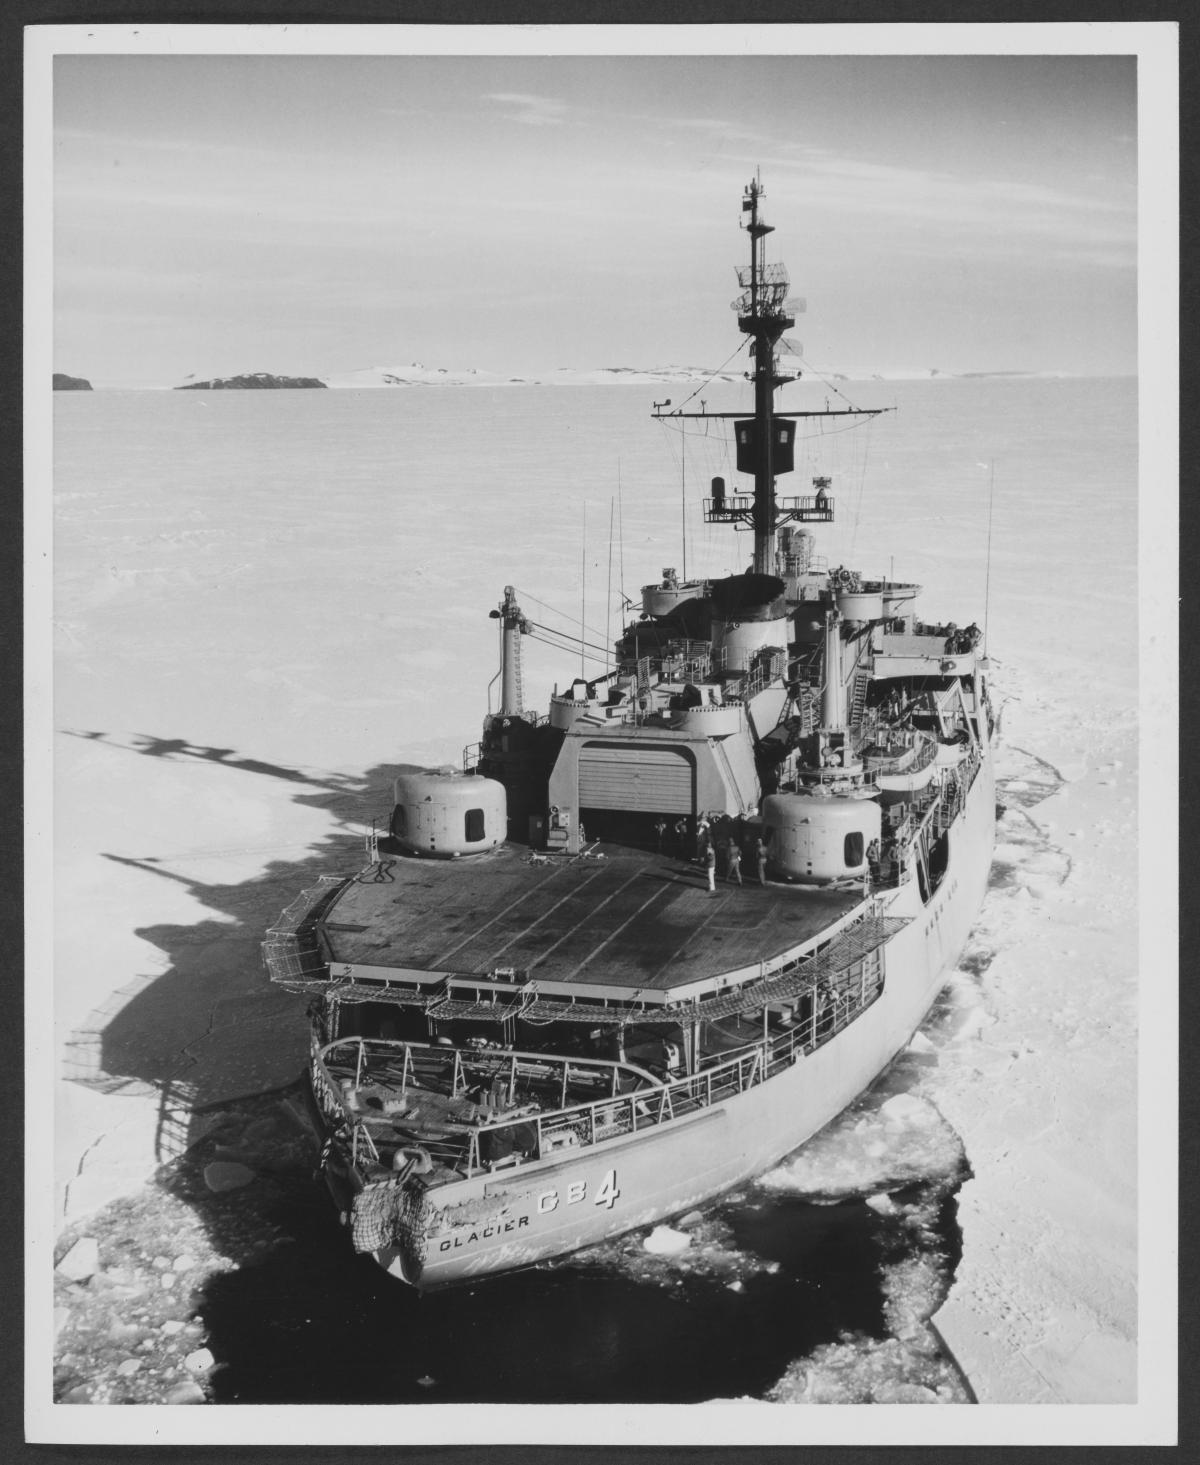 The USS Glacier (ABG-4) breaking ice out of McMurdo Sound en route to Hut Point.